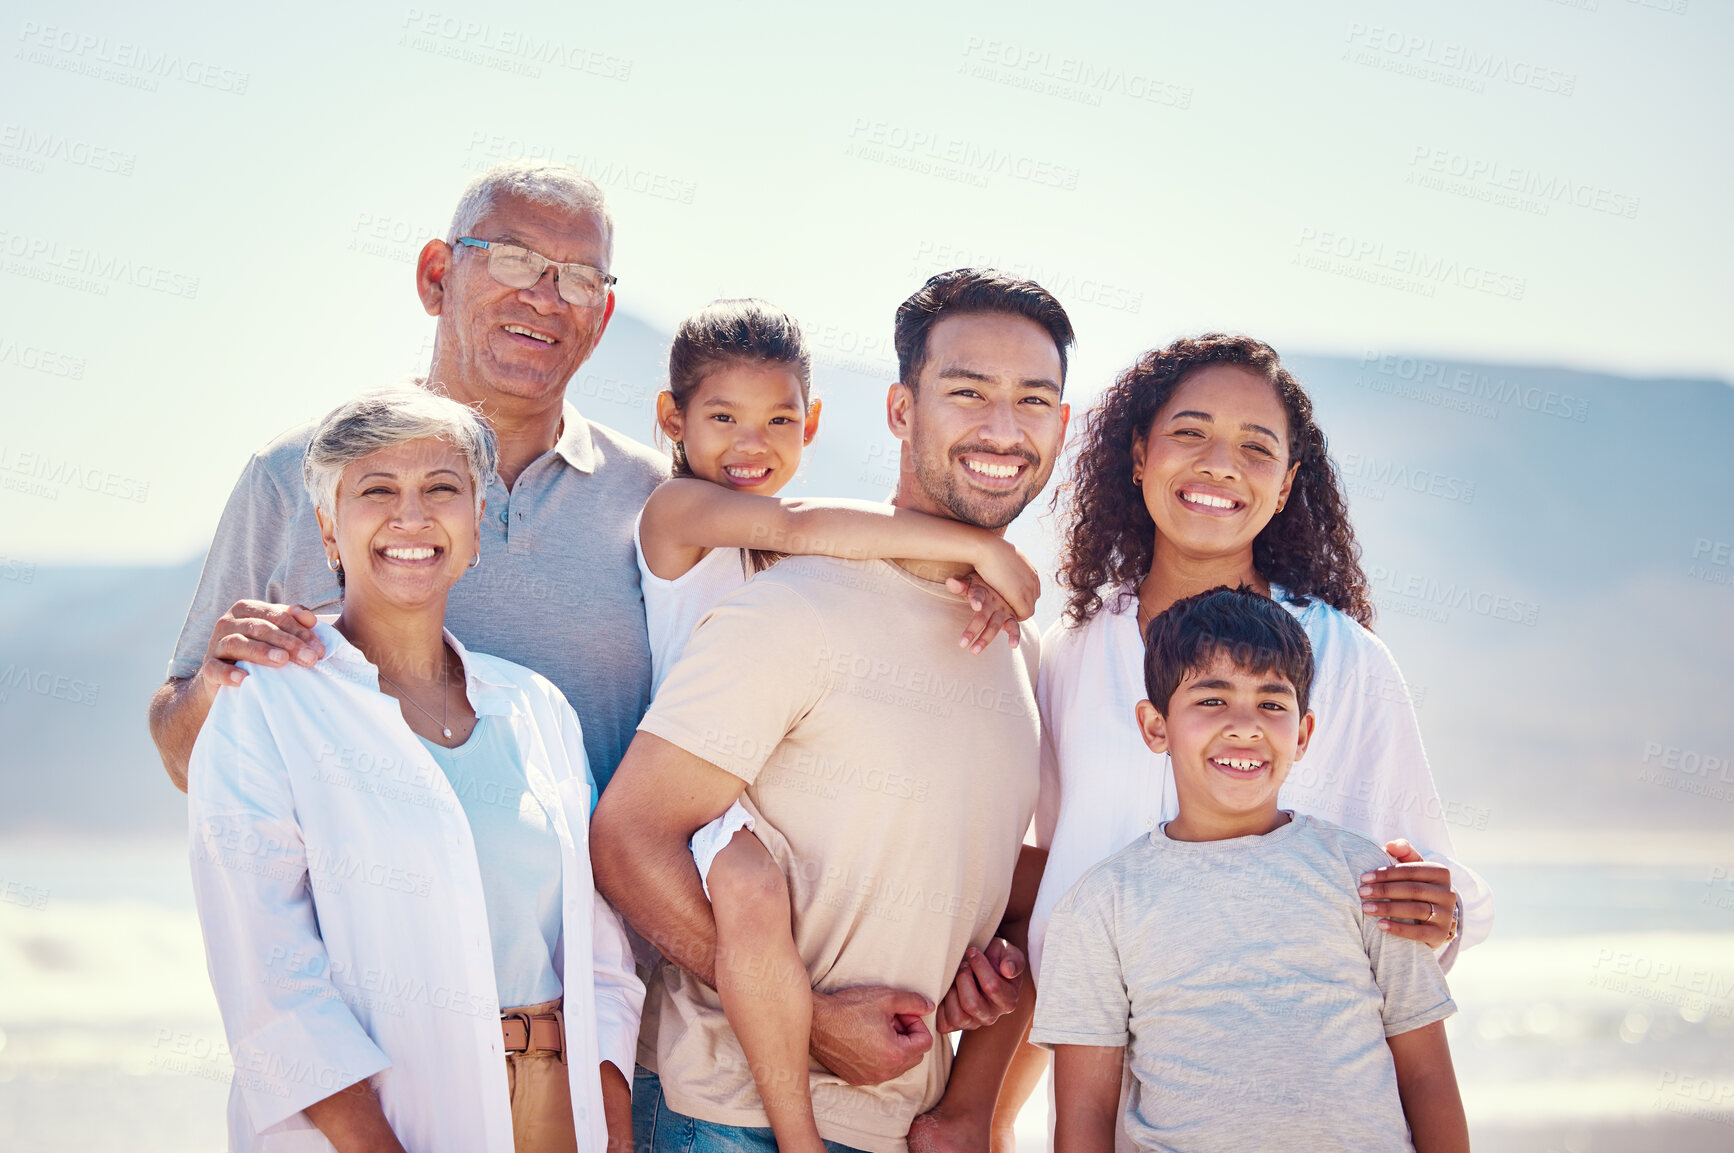 Buy stock photo Big family, portrait of grandparents and kids with parents, smile and happy bonding together on ocean vacation. Sun, fun and happiness for generations of men and women with children on beach holiday.